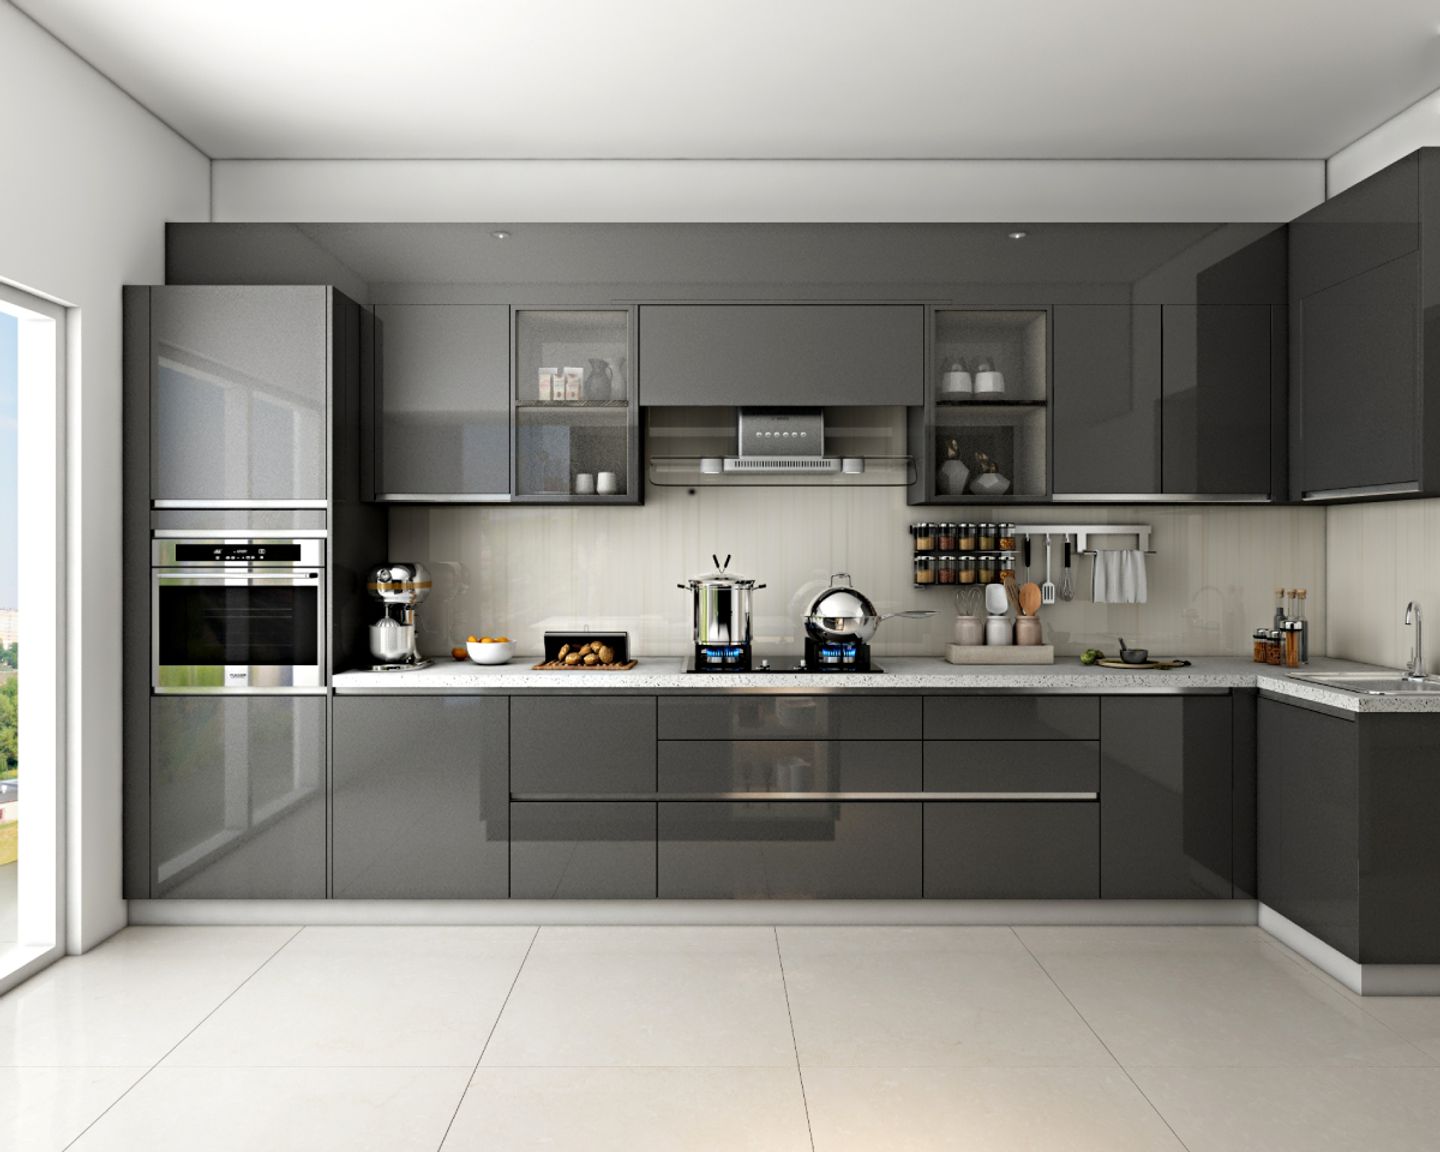 Modern Modular Kitchen Design With Sophisticated Grey Shutters